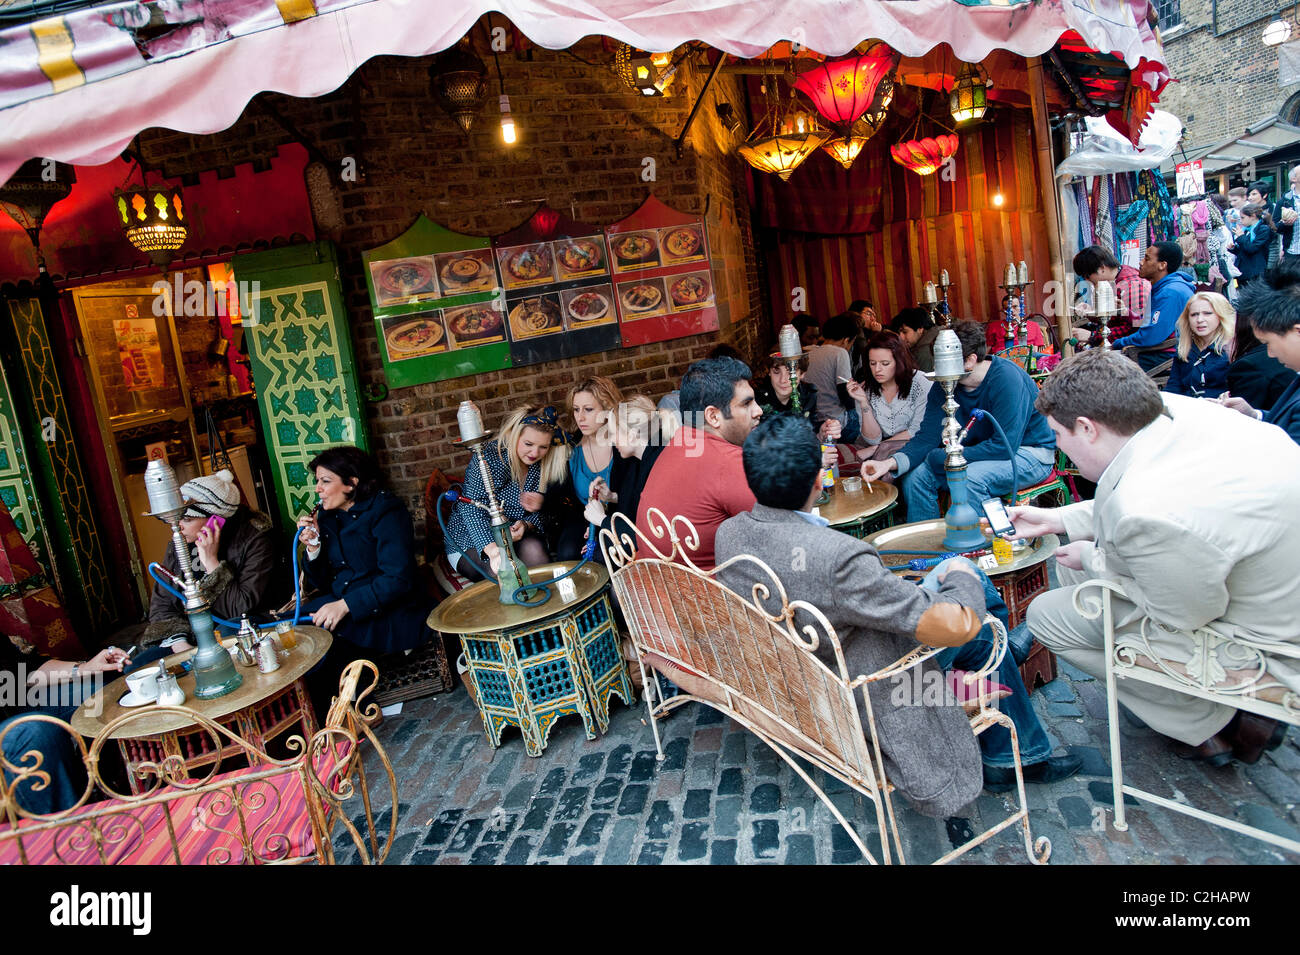 Shisha smokers in Moroccan cafe bar, The Stables Market, Camden, NW1, London, United Kingdom Stock Photo